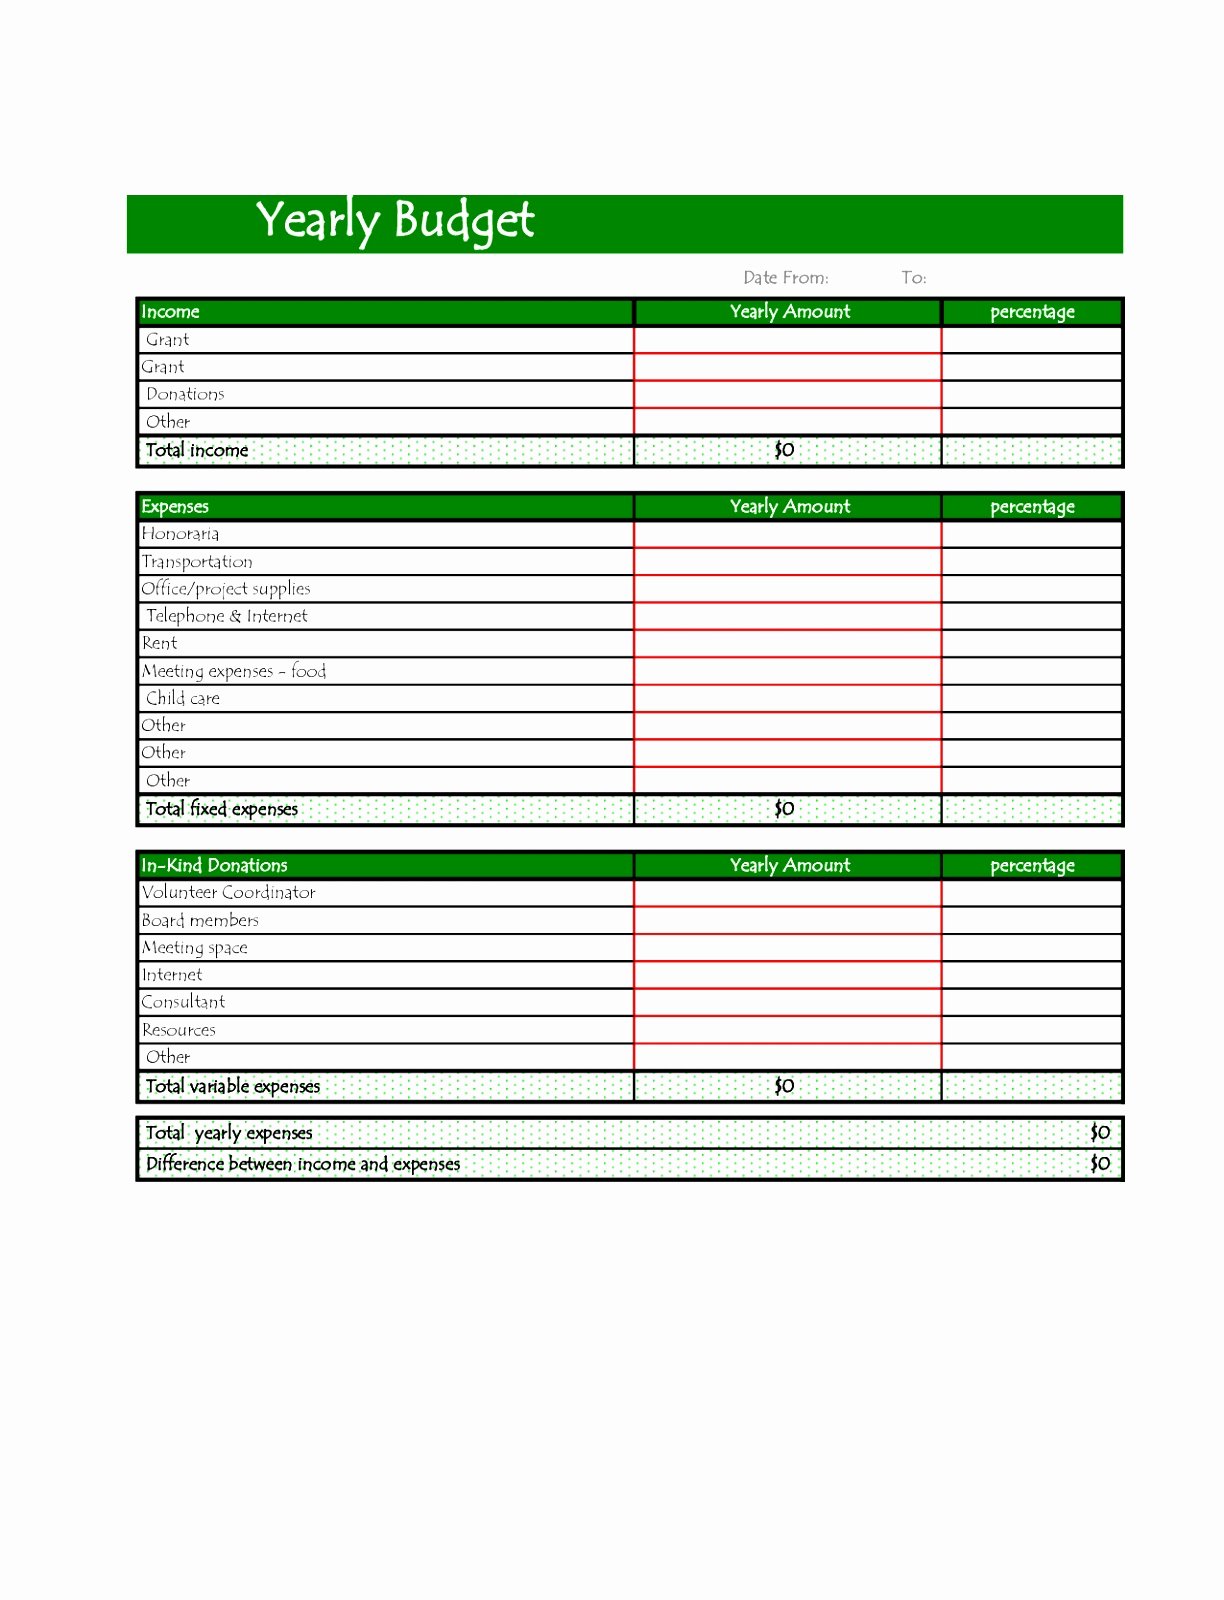 Daily Budget Template Excel Inspirational 6 Annual Operating Bud Template Uyira